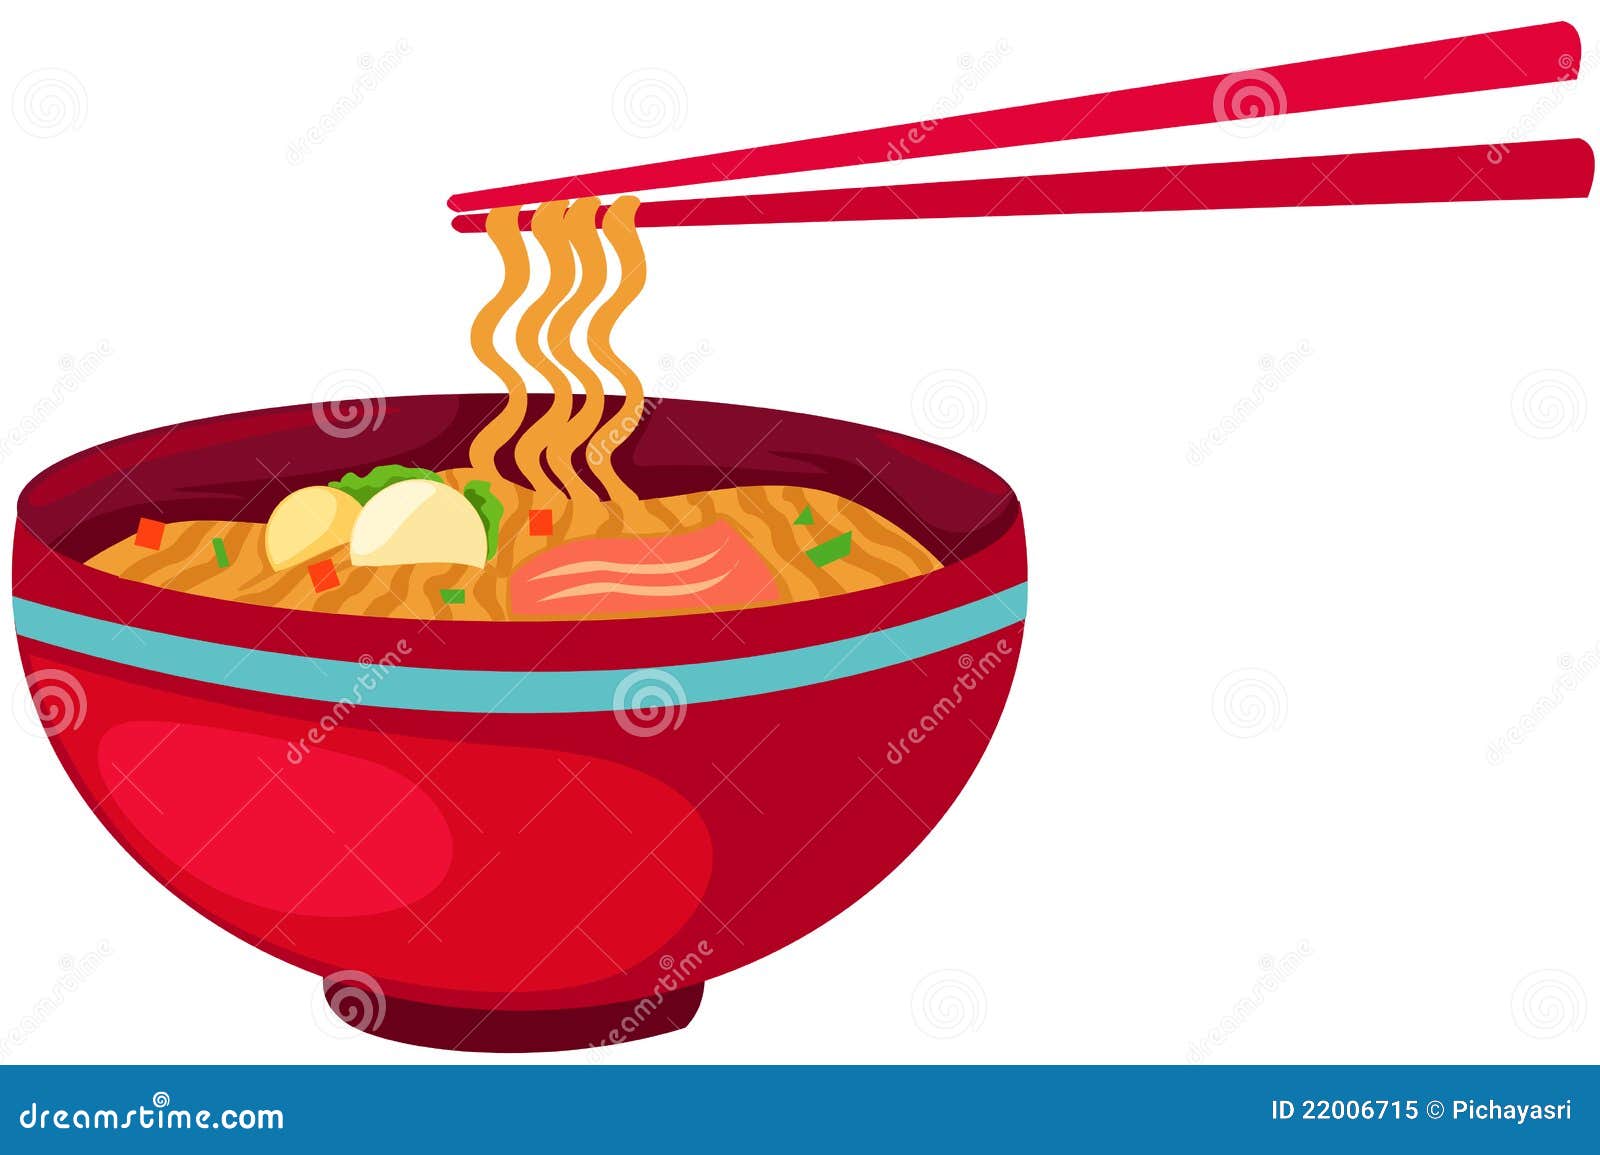 Noodles Food With Chopsticks Royalty Free Stock Photo - Image: 22006715